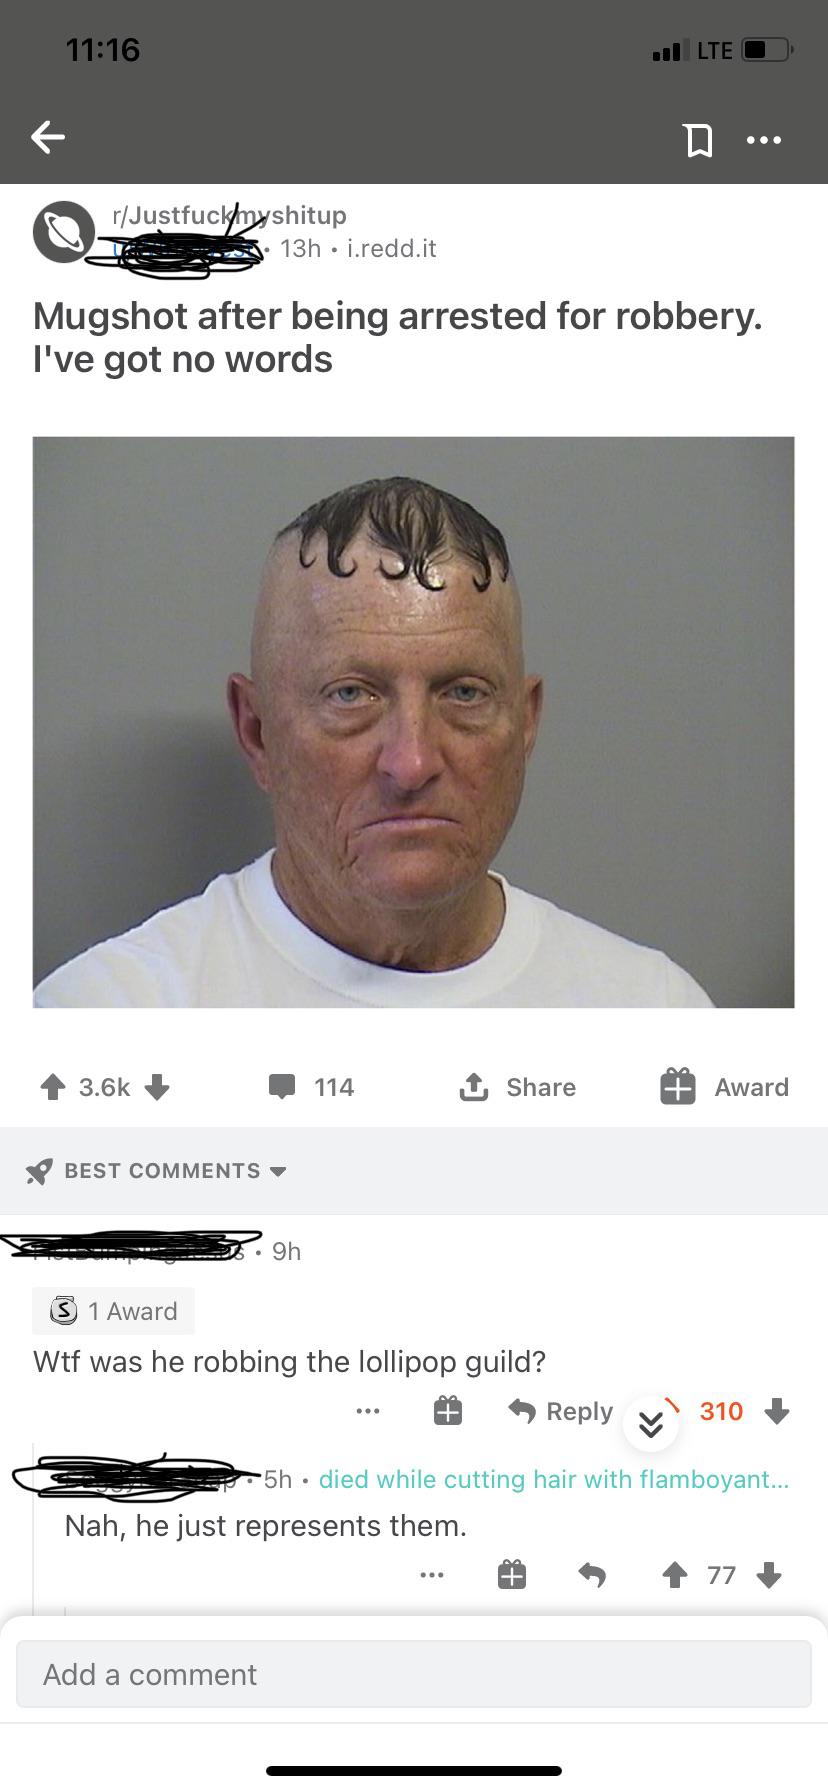 website - nul Lte rJustfuckmyshitup 13h j.redd.it Mugshot after being arrested for robbery. I've got no words 114 1 Award Best 9h 1 Award Wtf was he robbing the lollipop guild? 310 5h died while cutting hair with flamboyant... Nah, he just represents them